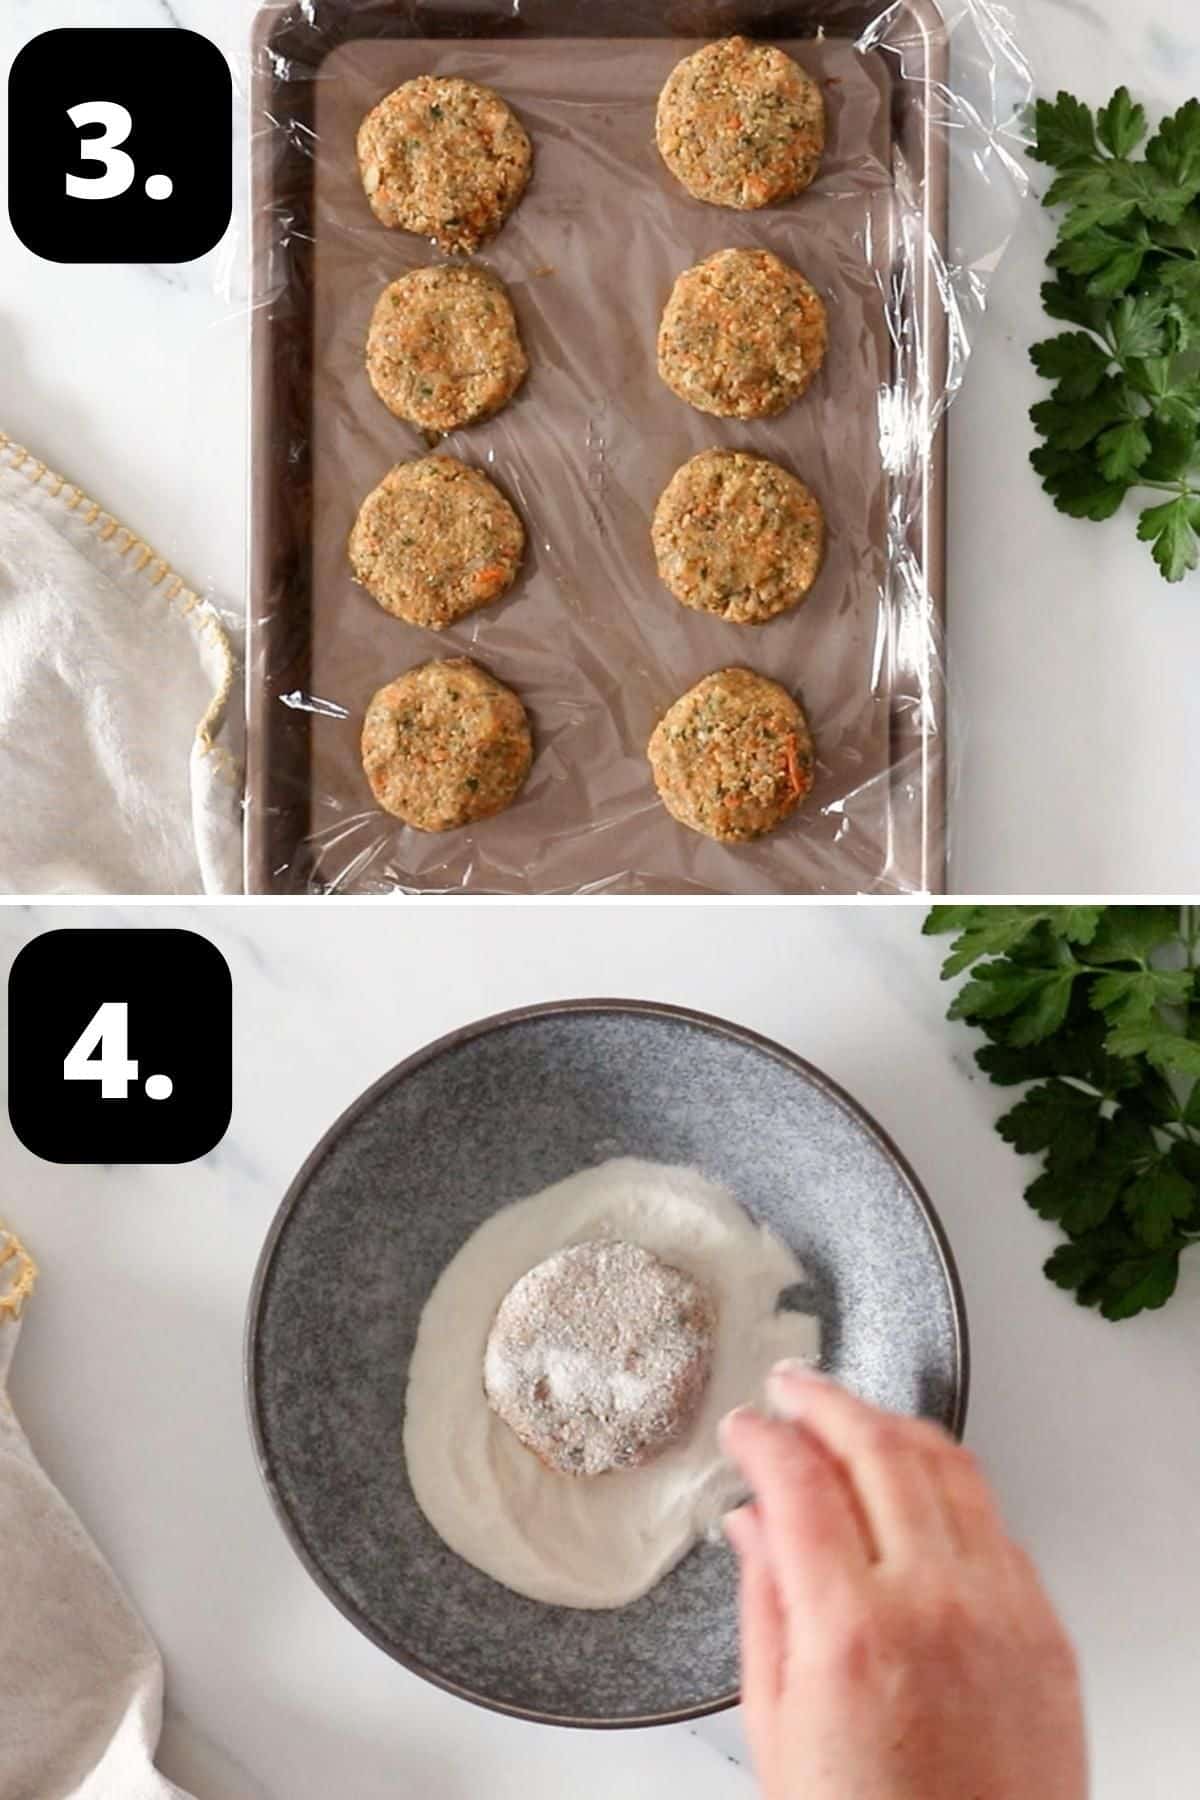 Steps 3-4 of preparing this recipe - the flattened and shaped patties on a tray and coating the patties in rice flour.